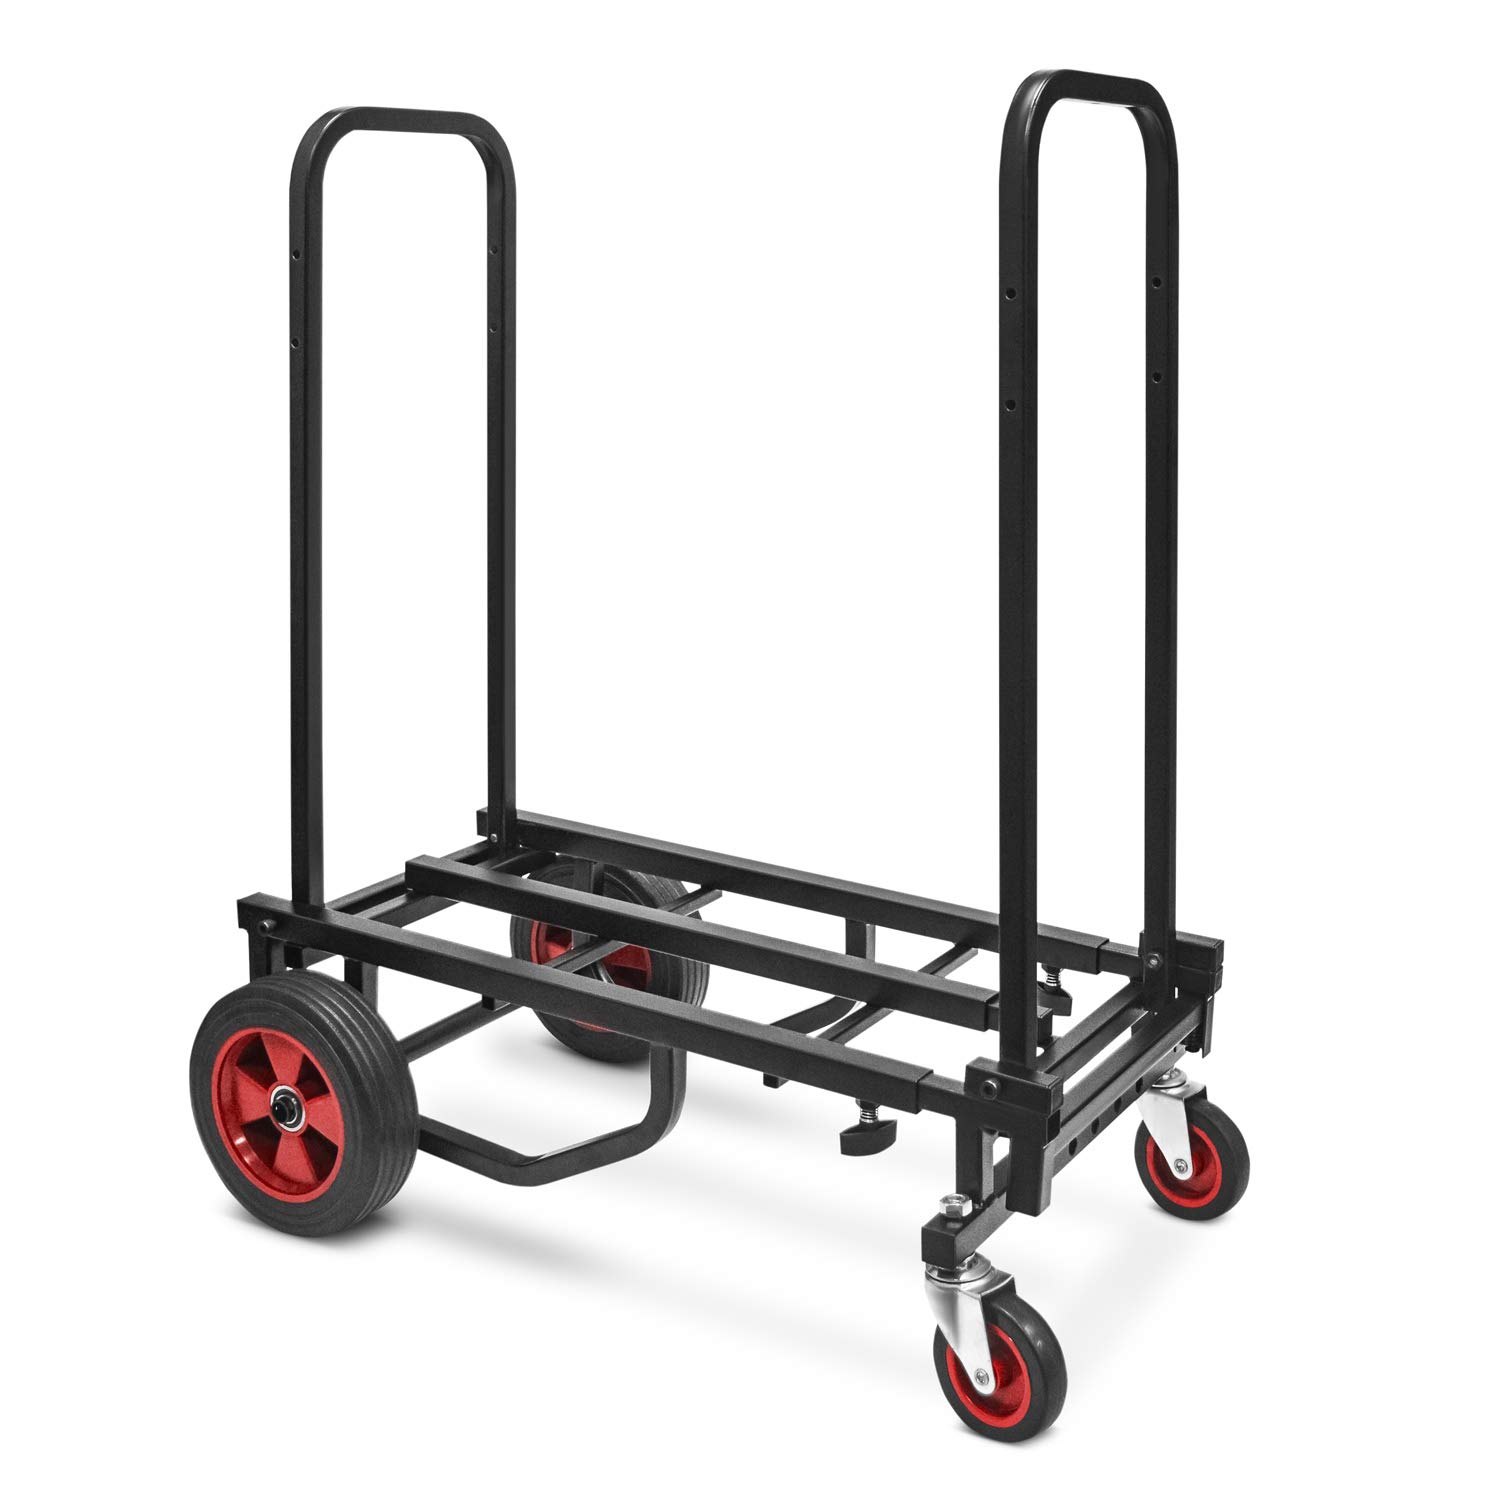 Pyle Adjustable Professional Equipment Cart - Compact 8...